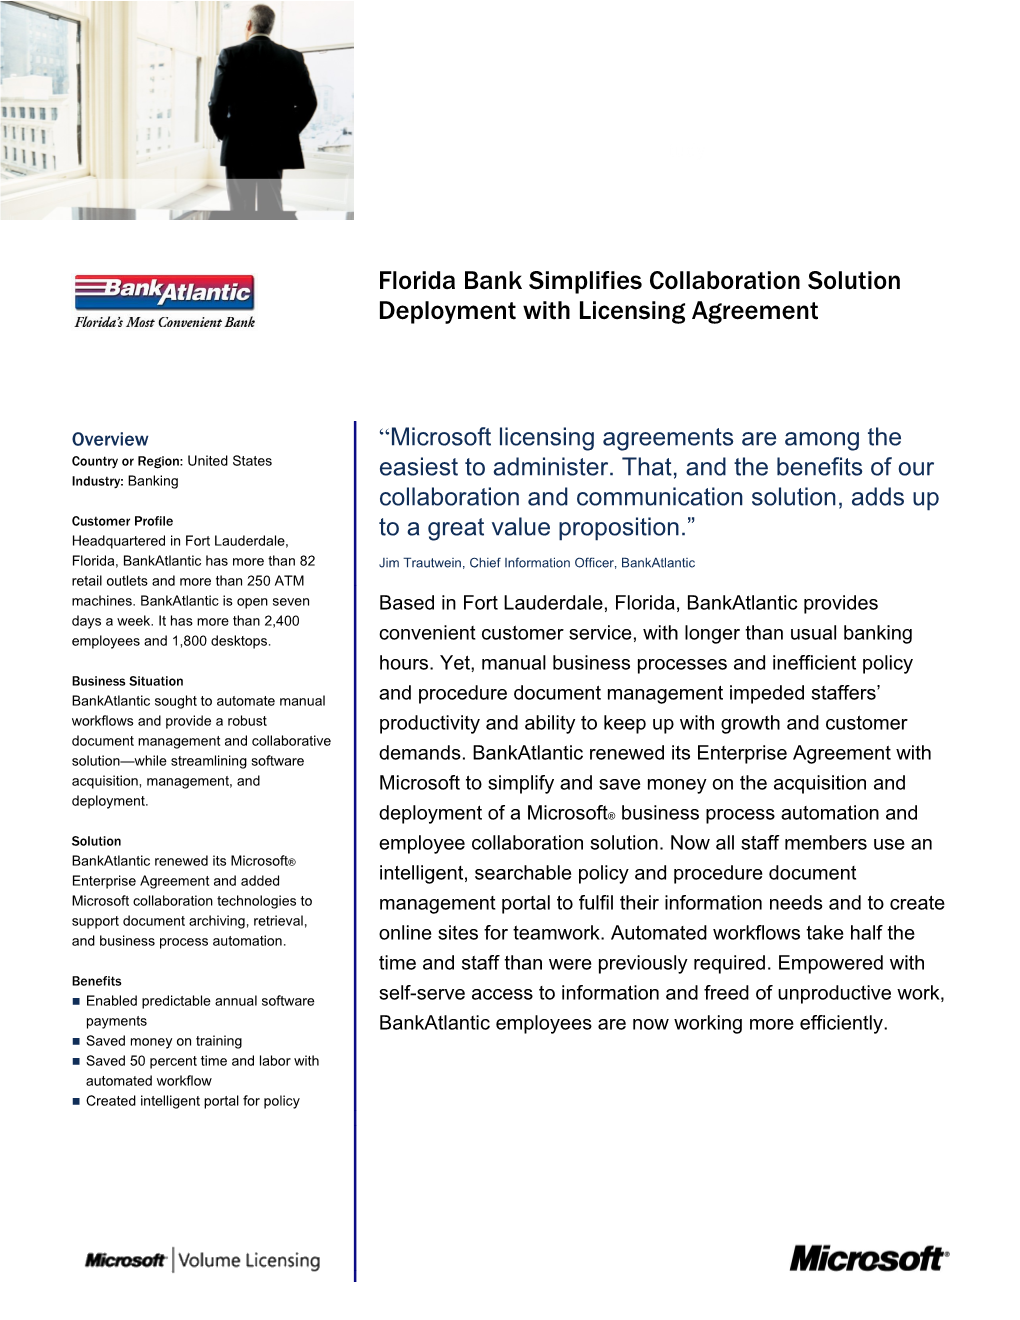 Florida Bank Simplifies Collaboration Solution Deployment with Licensing Agreement